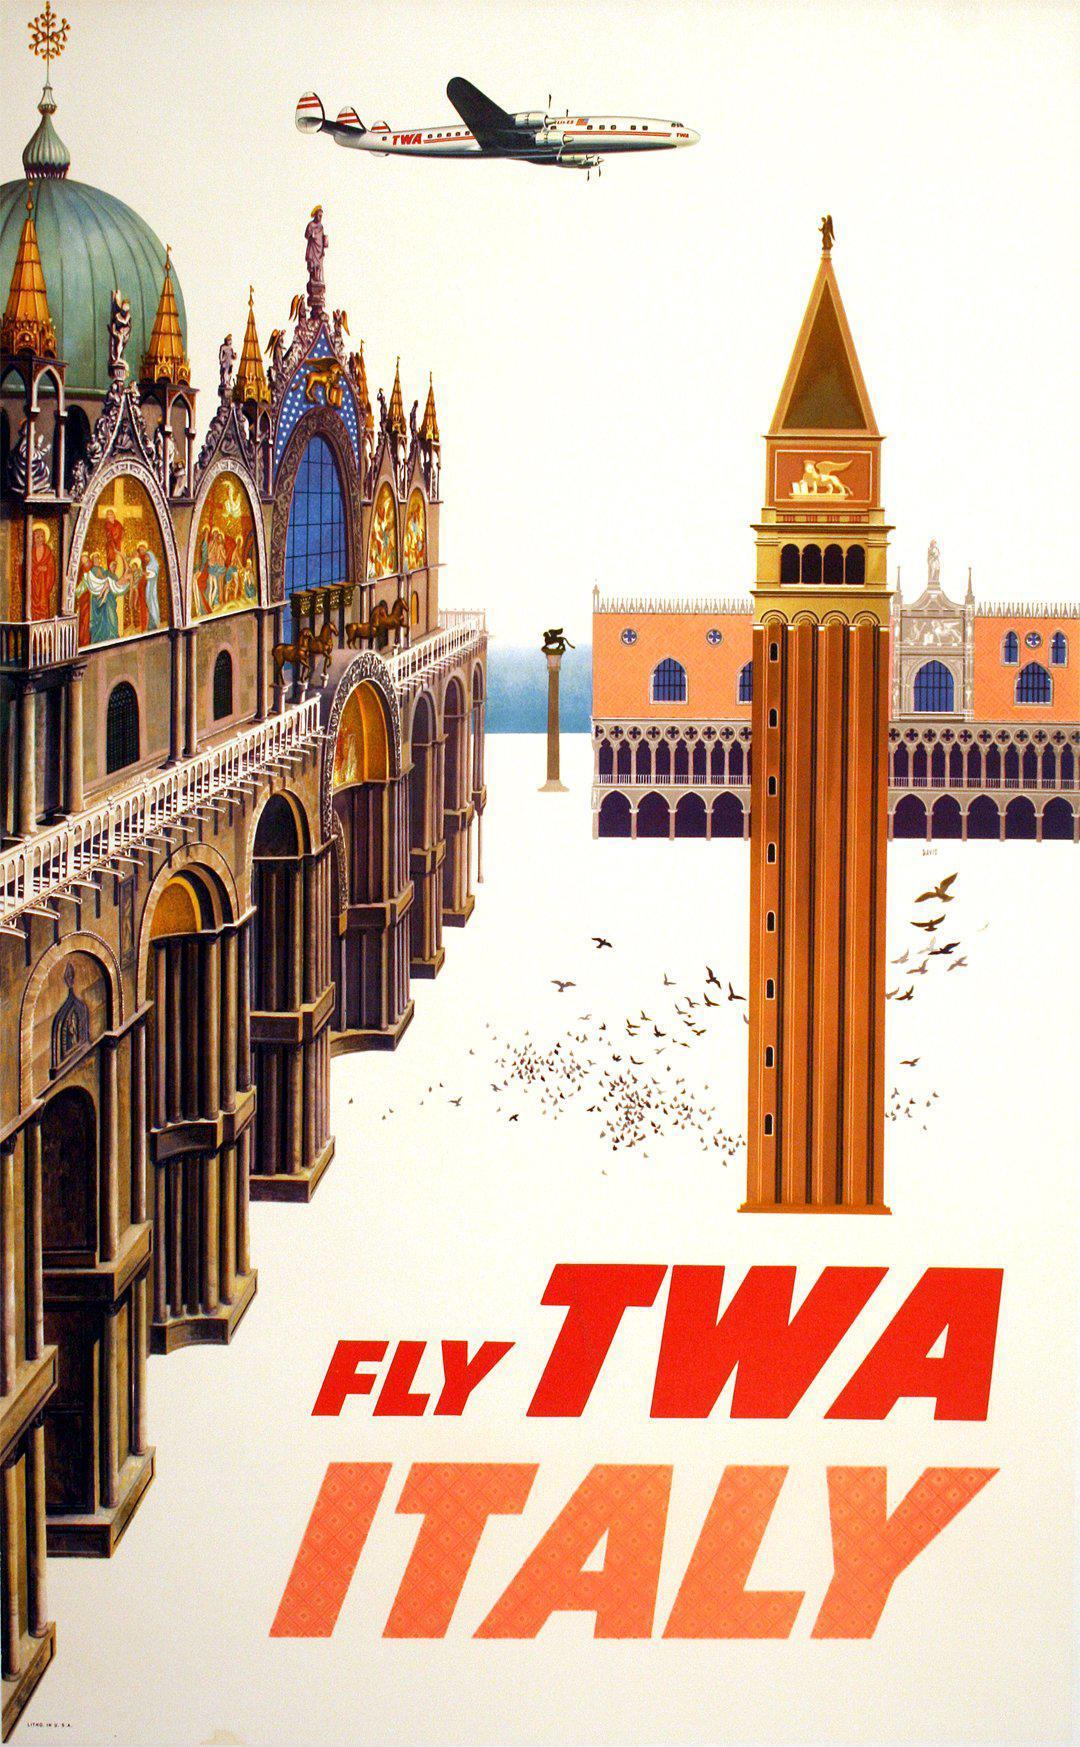 Original Vintage Poster Fly TWA to Italy by David Klein c1960 Venice